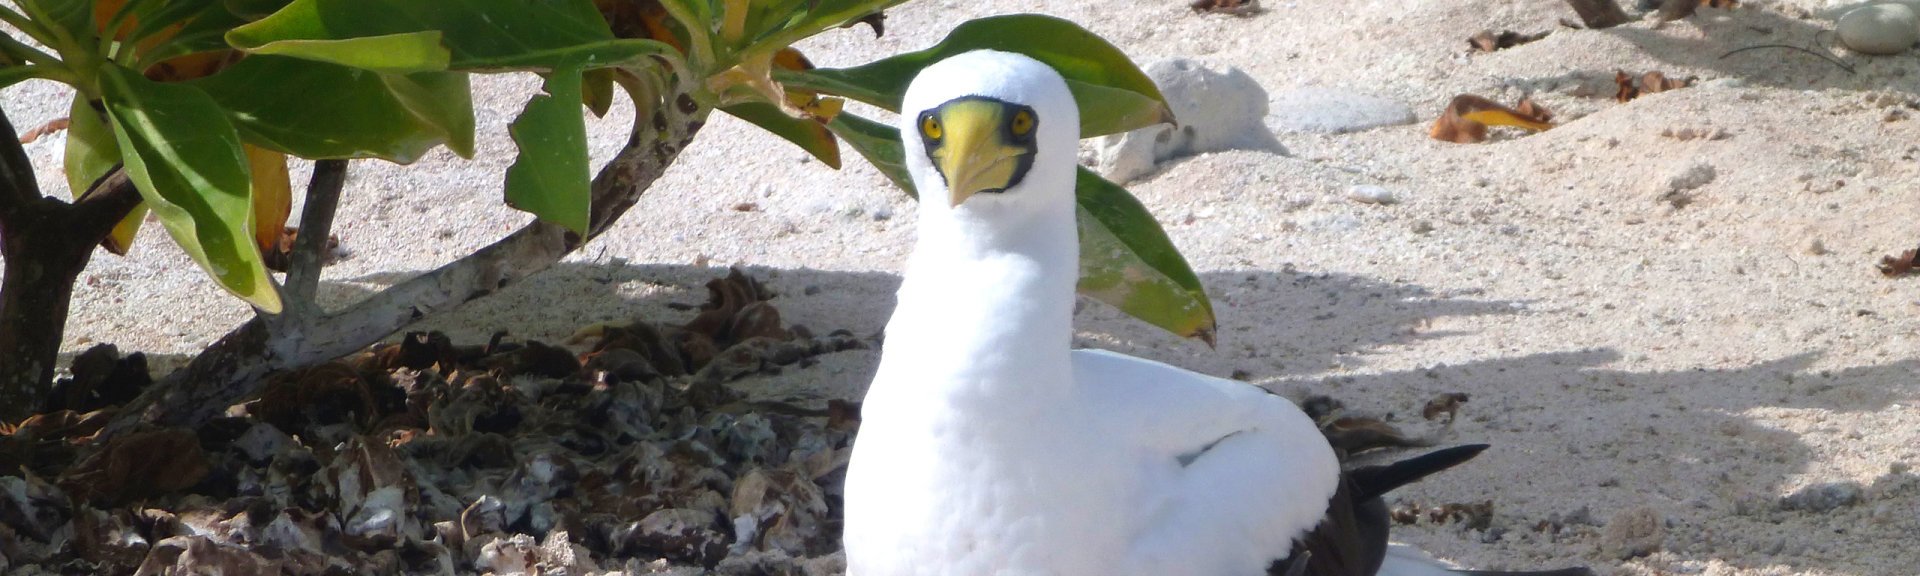 Masked booby on Southern Cay (one of the Magdelaine Cays in the Coral Sea Commonwealth Marine Park)